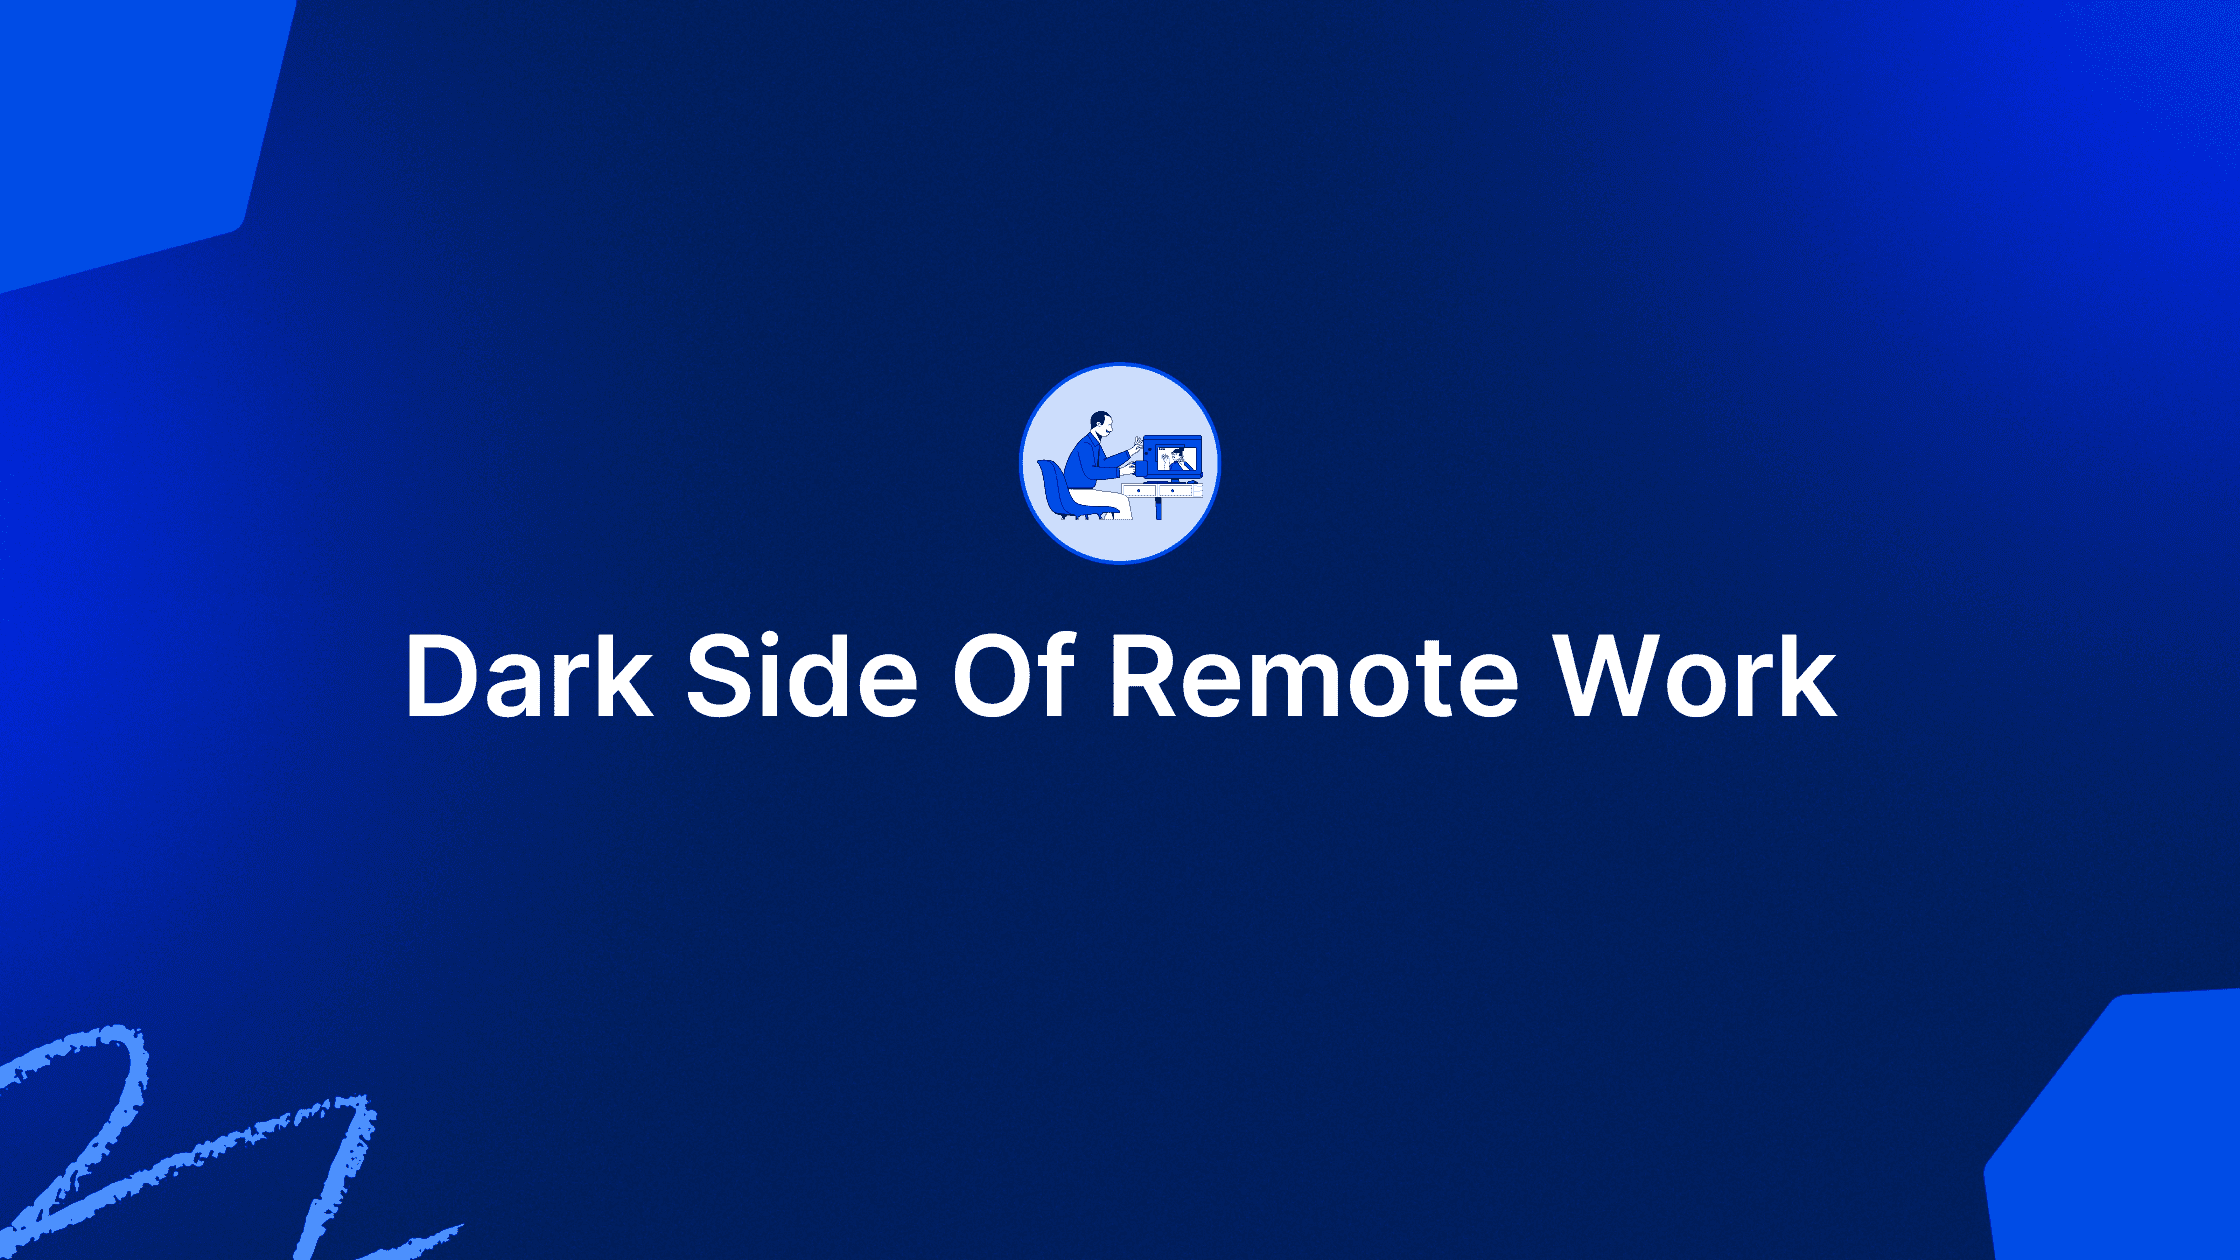 The Dark Side of Remote Work Nobody Talks About